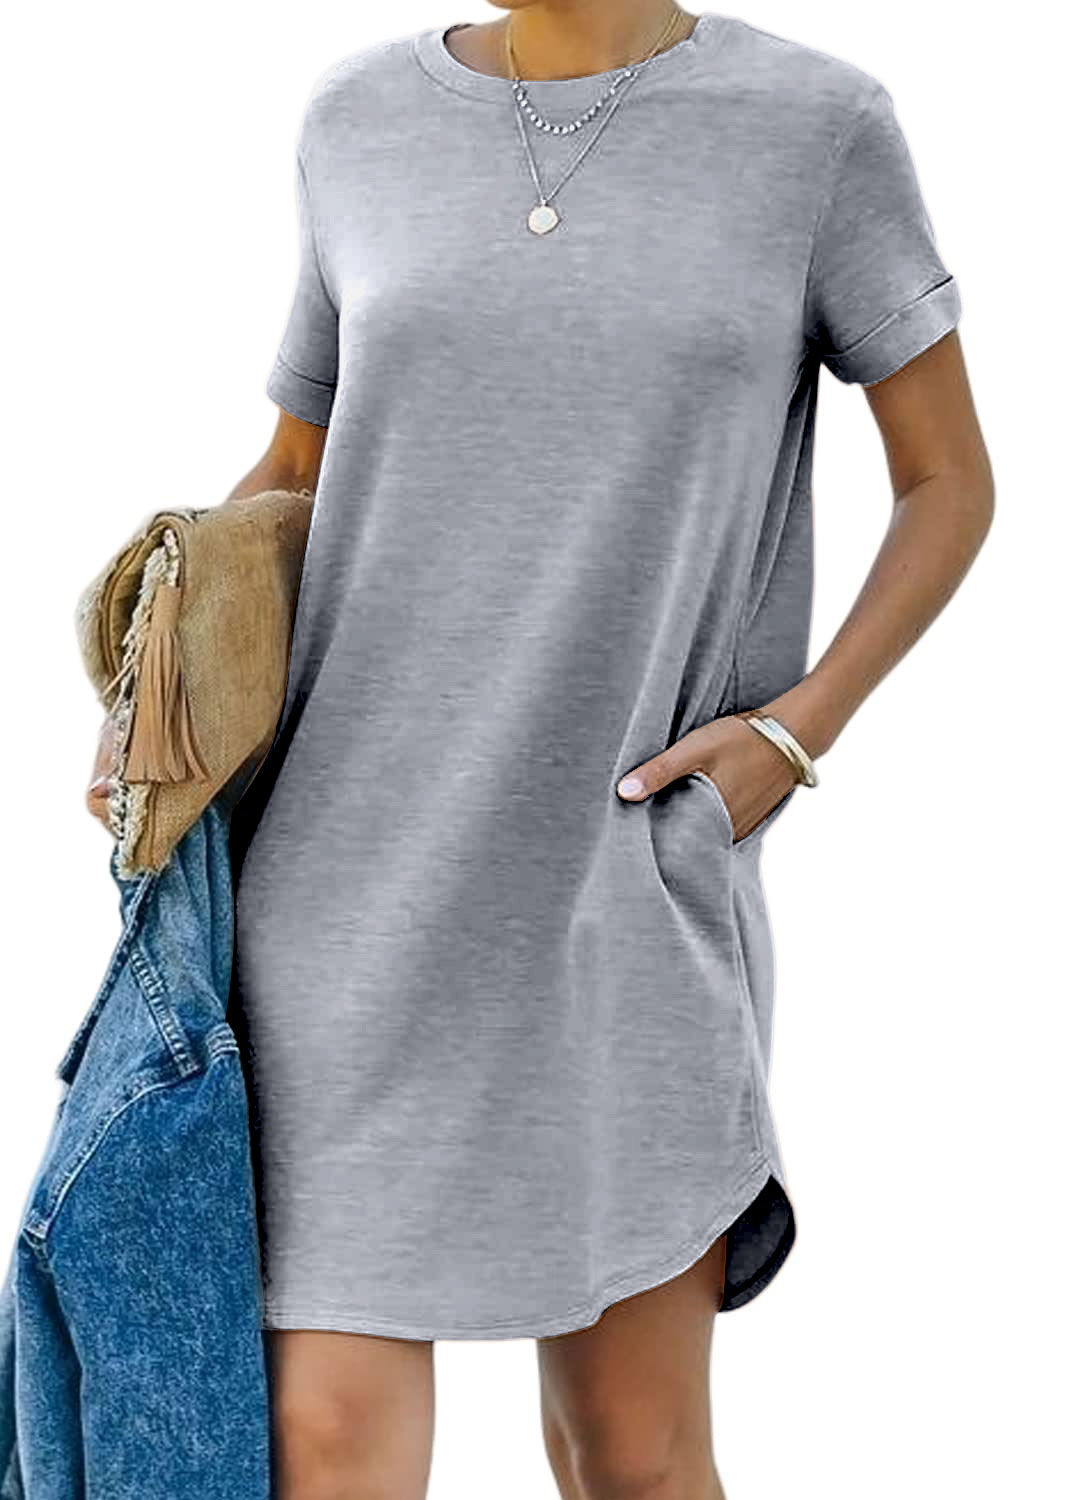 Women's Casual Short Sleeve T Shirt Dress Basic Dresses with Pockets(BUY 2 FREE SHIPPING)